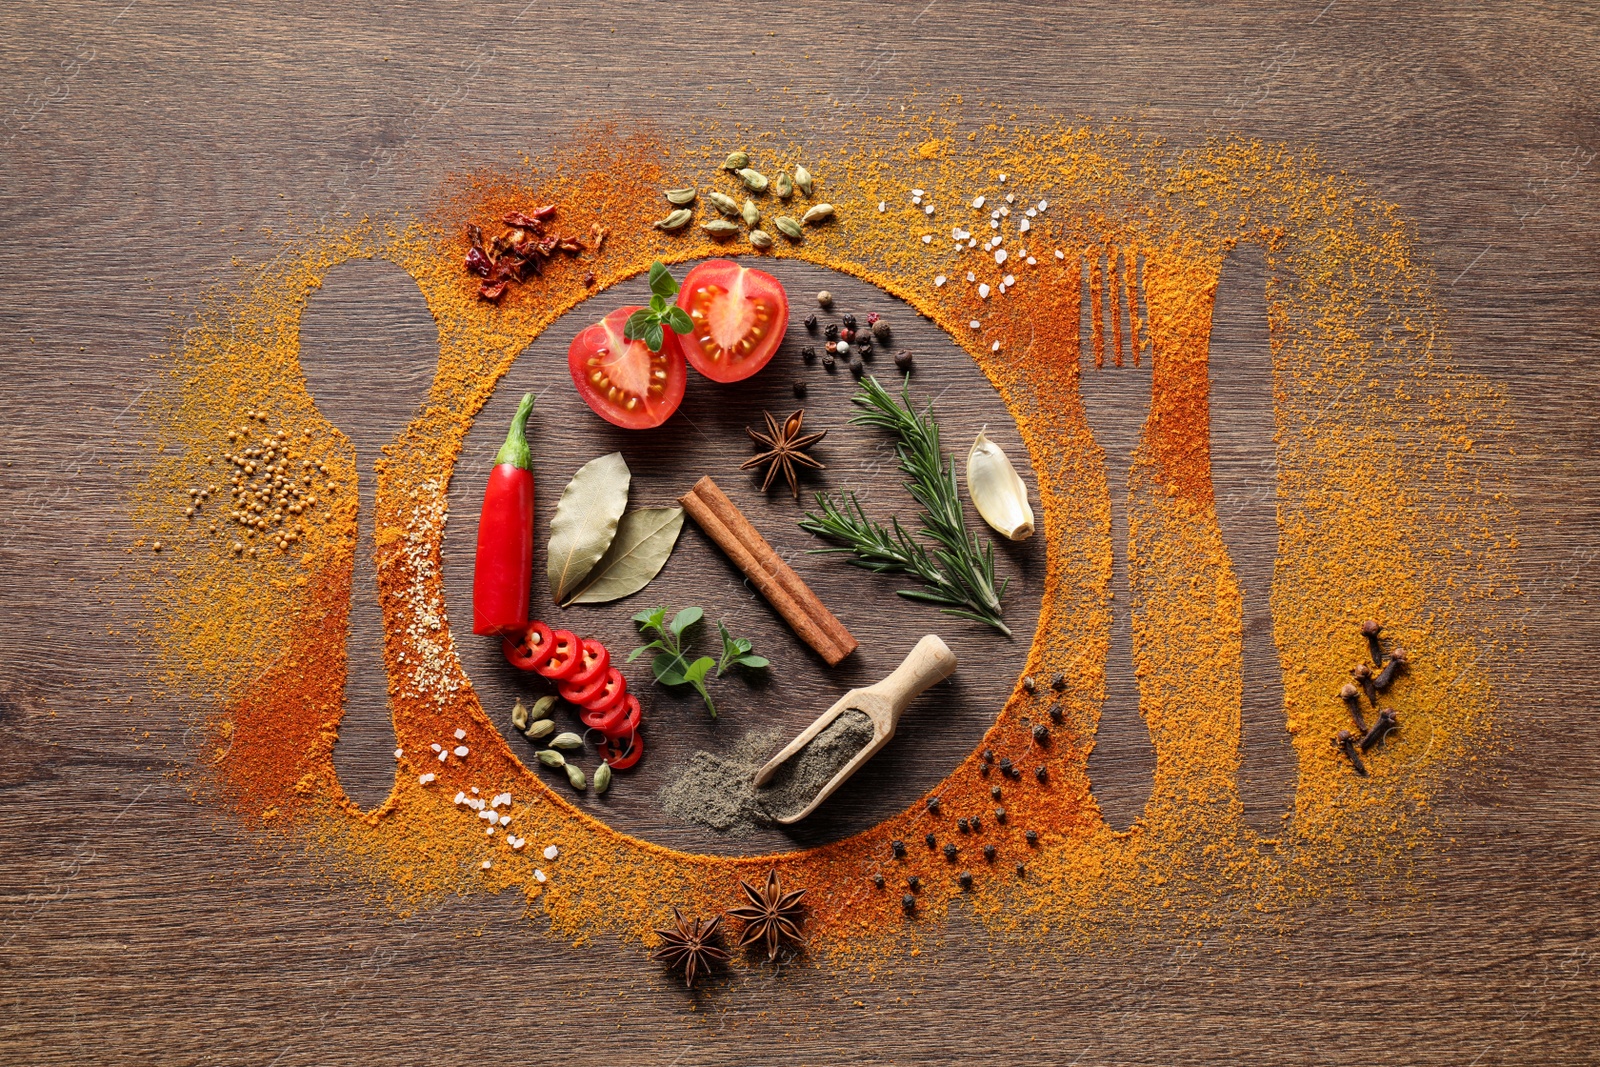 Photo of Silhouettes of plate with cutlery made with spices and different ingredients on wooden table, flat lay